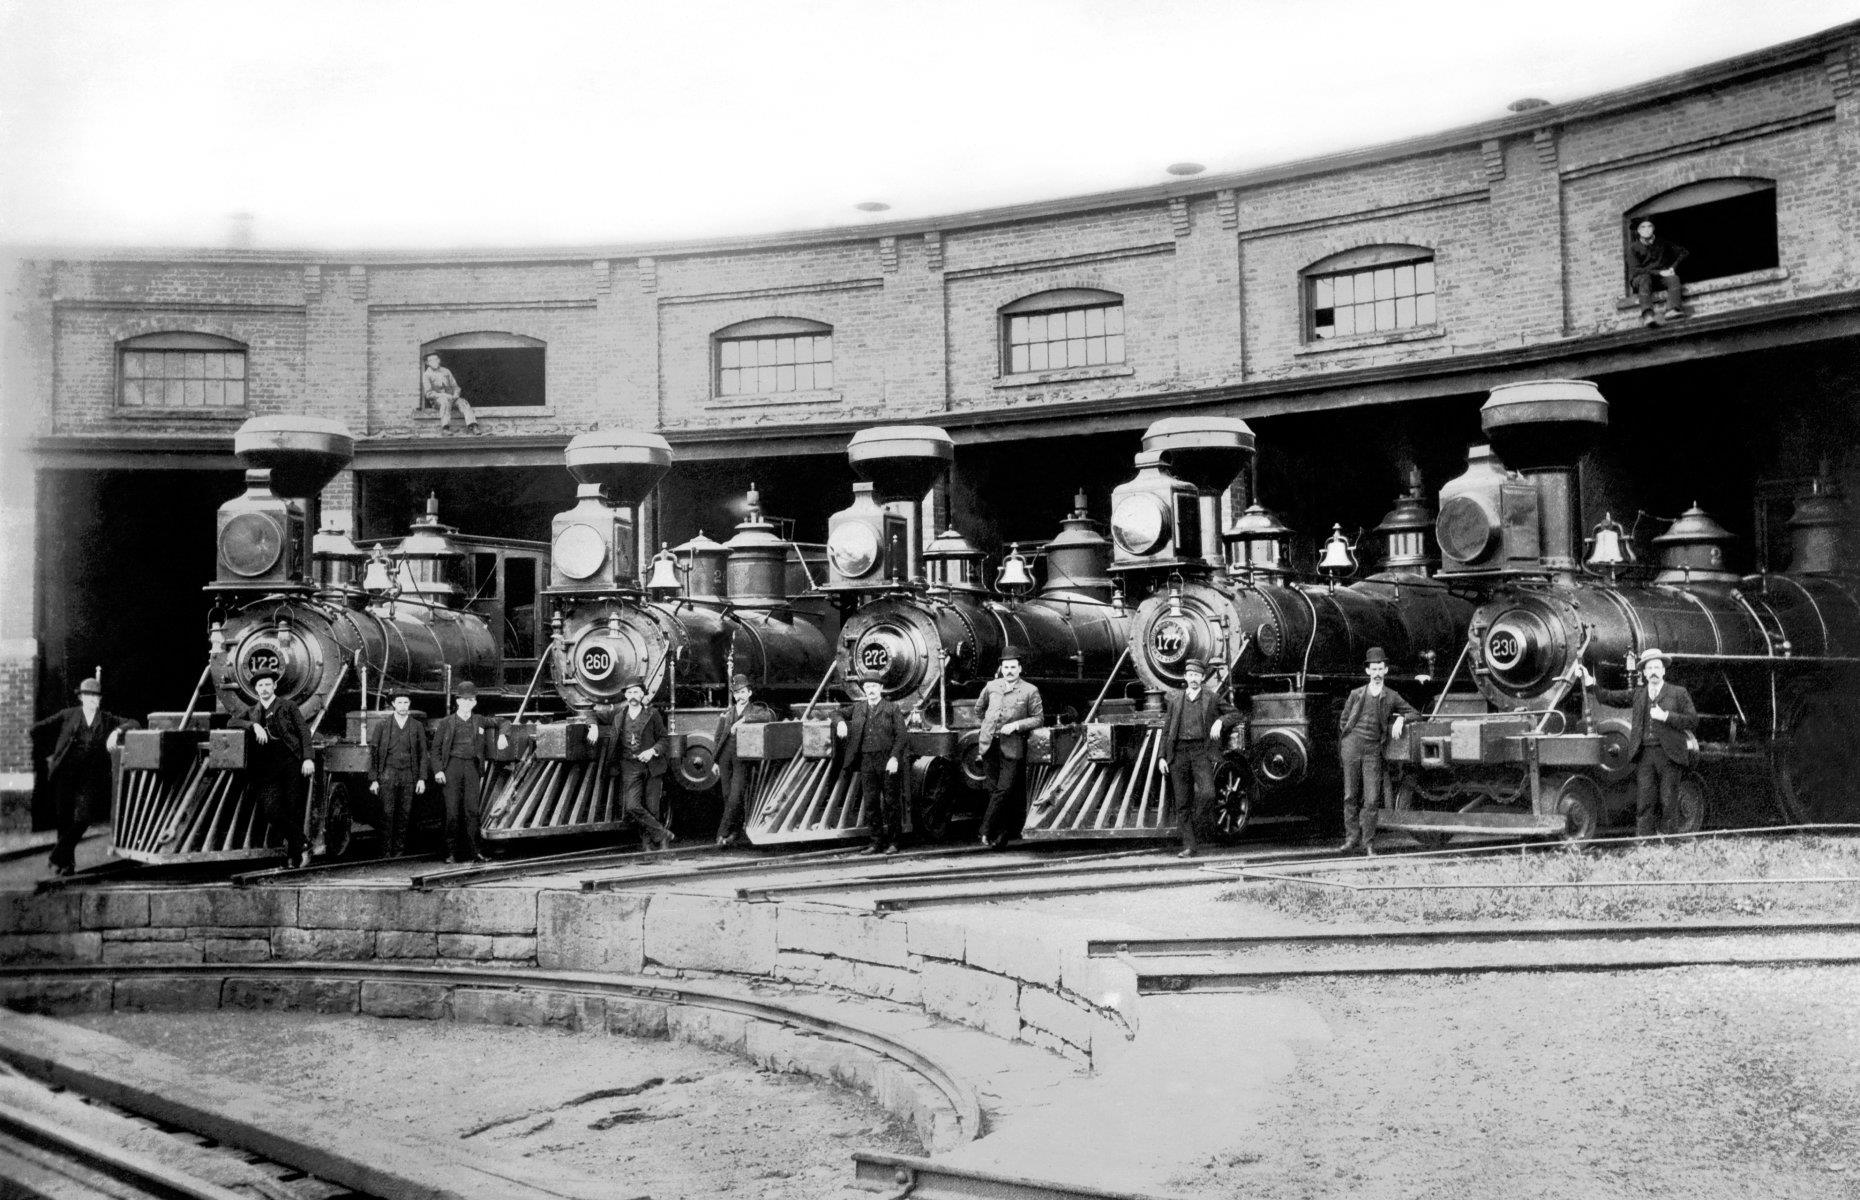 <p>The Delaware and Hudson Canal Company had transported coal in New York State since 1828, but by the 1870s water transport was slow and unprofitable. Instead, the managers of the D&H transitioned into rail transport. By 1885, when this photograph was taken in the Drake Street engine house in New York, the company’s rail lines stretched across the state and beyond, and it abandoned the obsolete canal in 1898.</p>